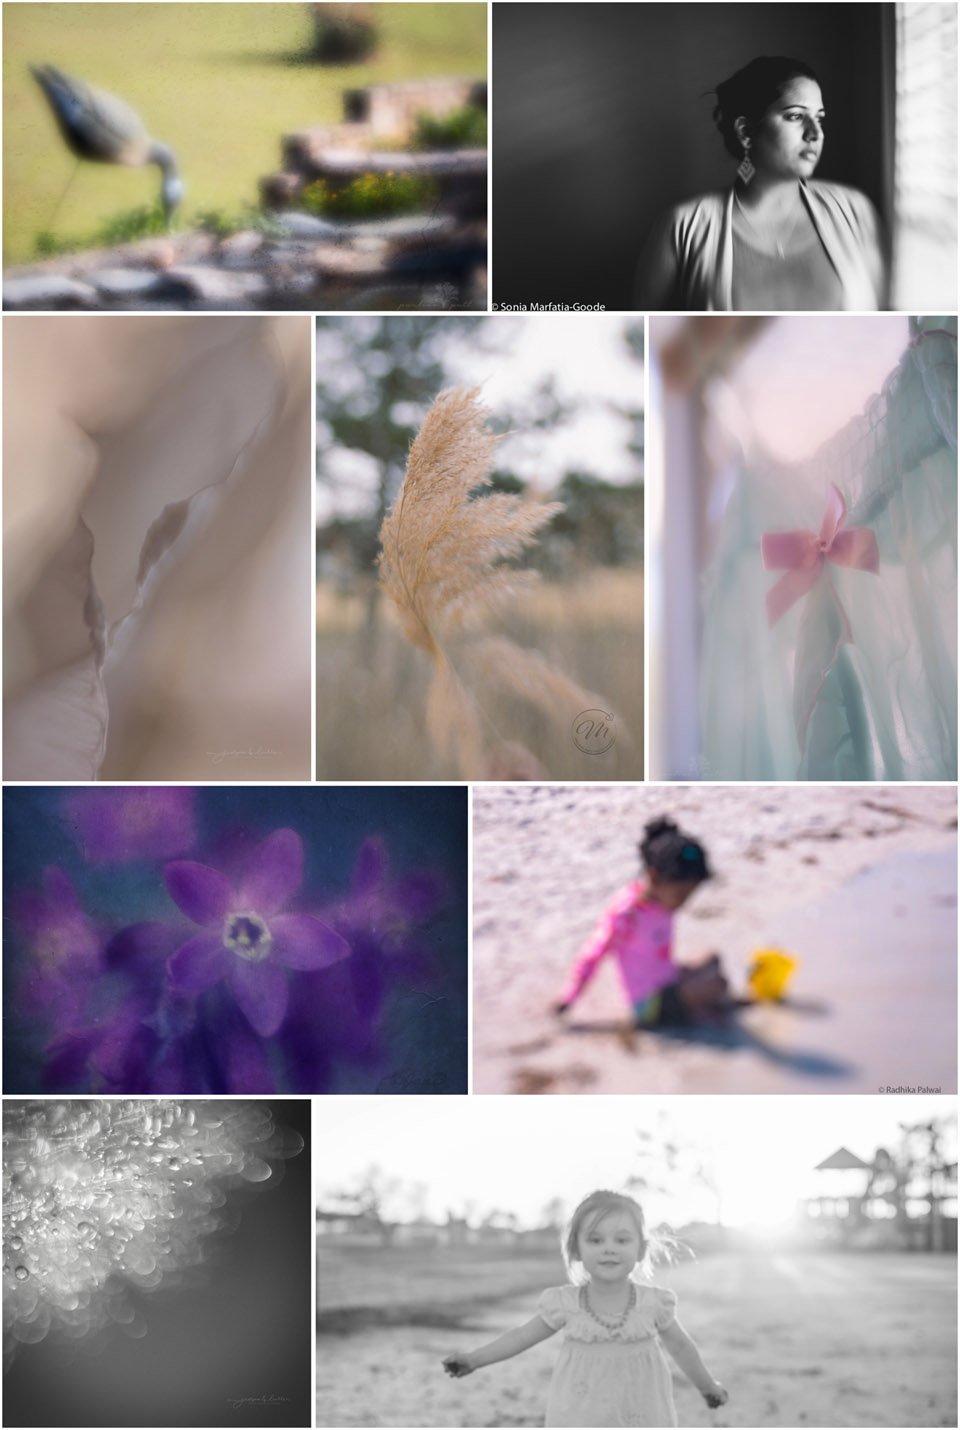 Collaboration Collage of Out of Focus Photographs 